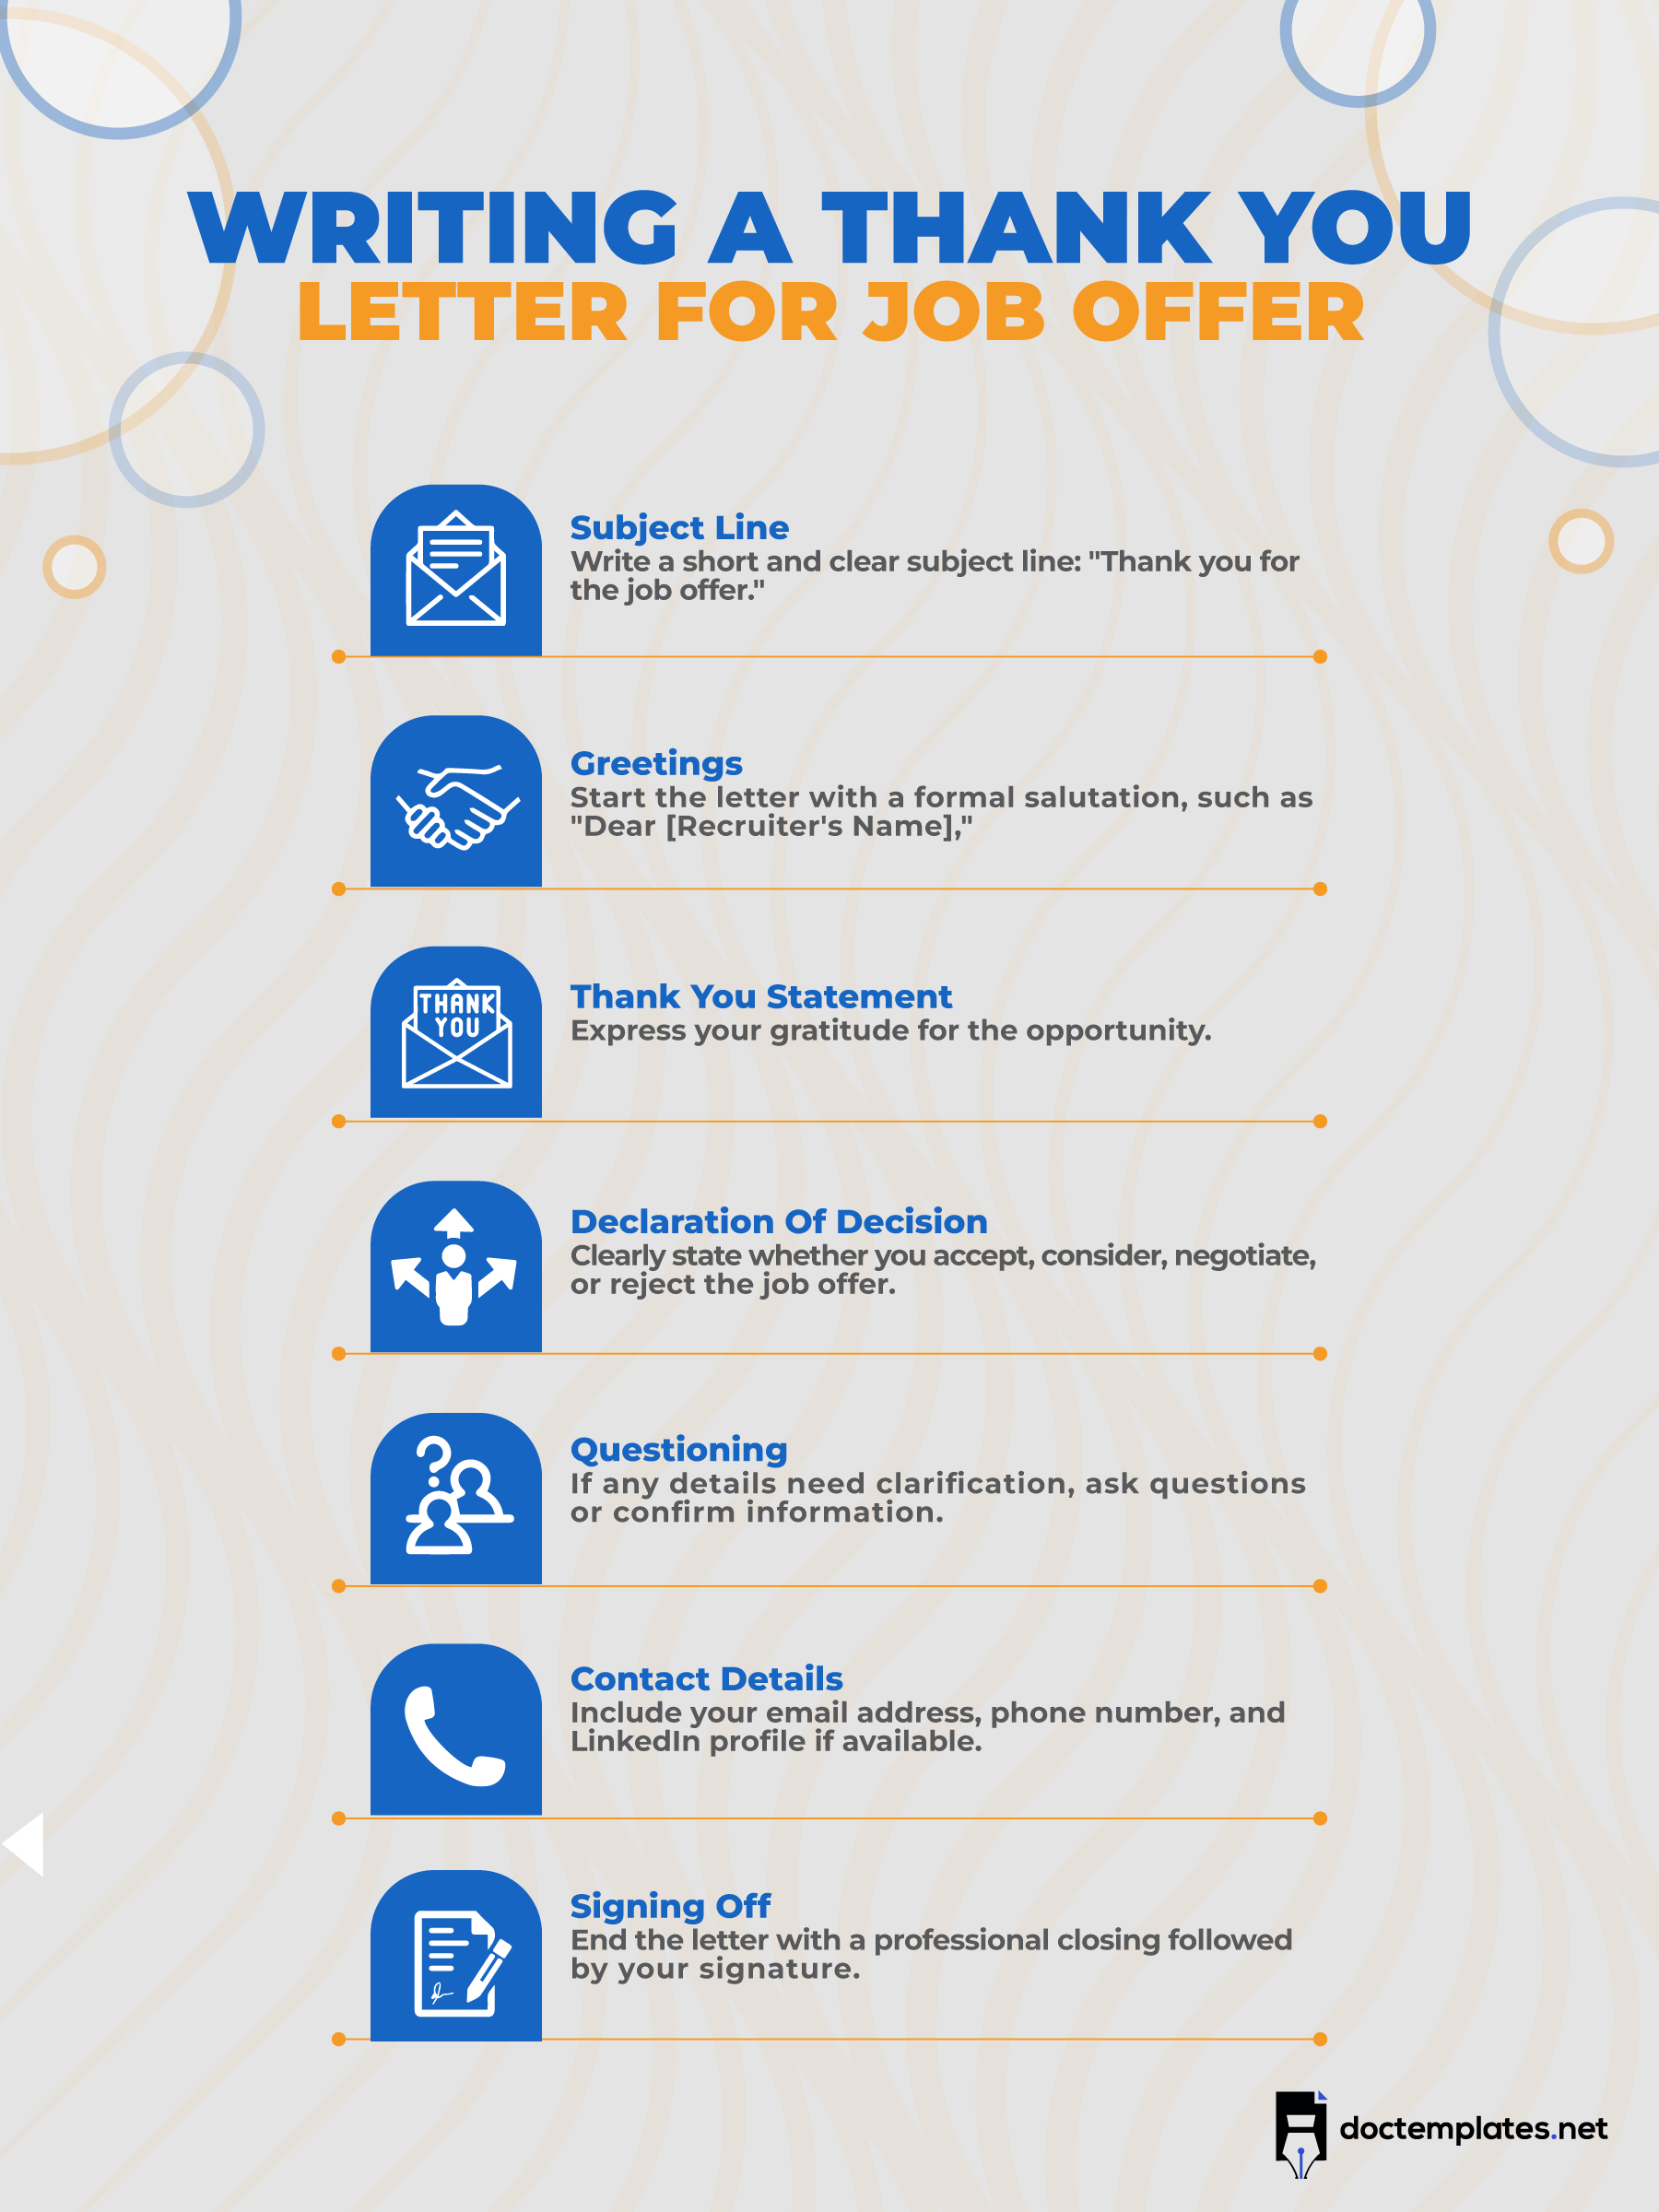 This infographic is about writing job offer thank you letter.